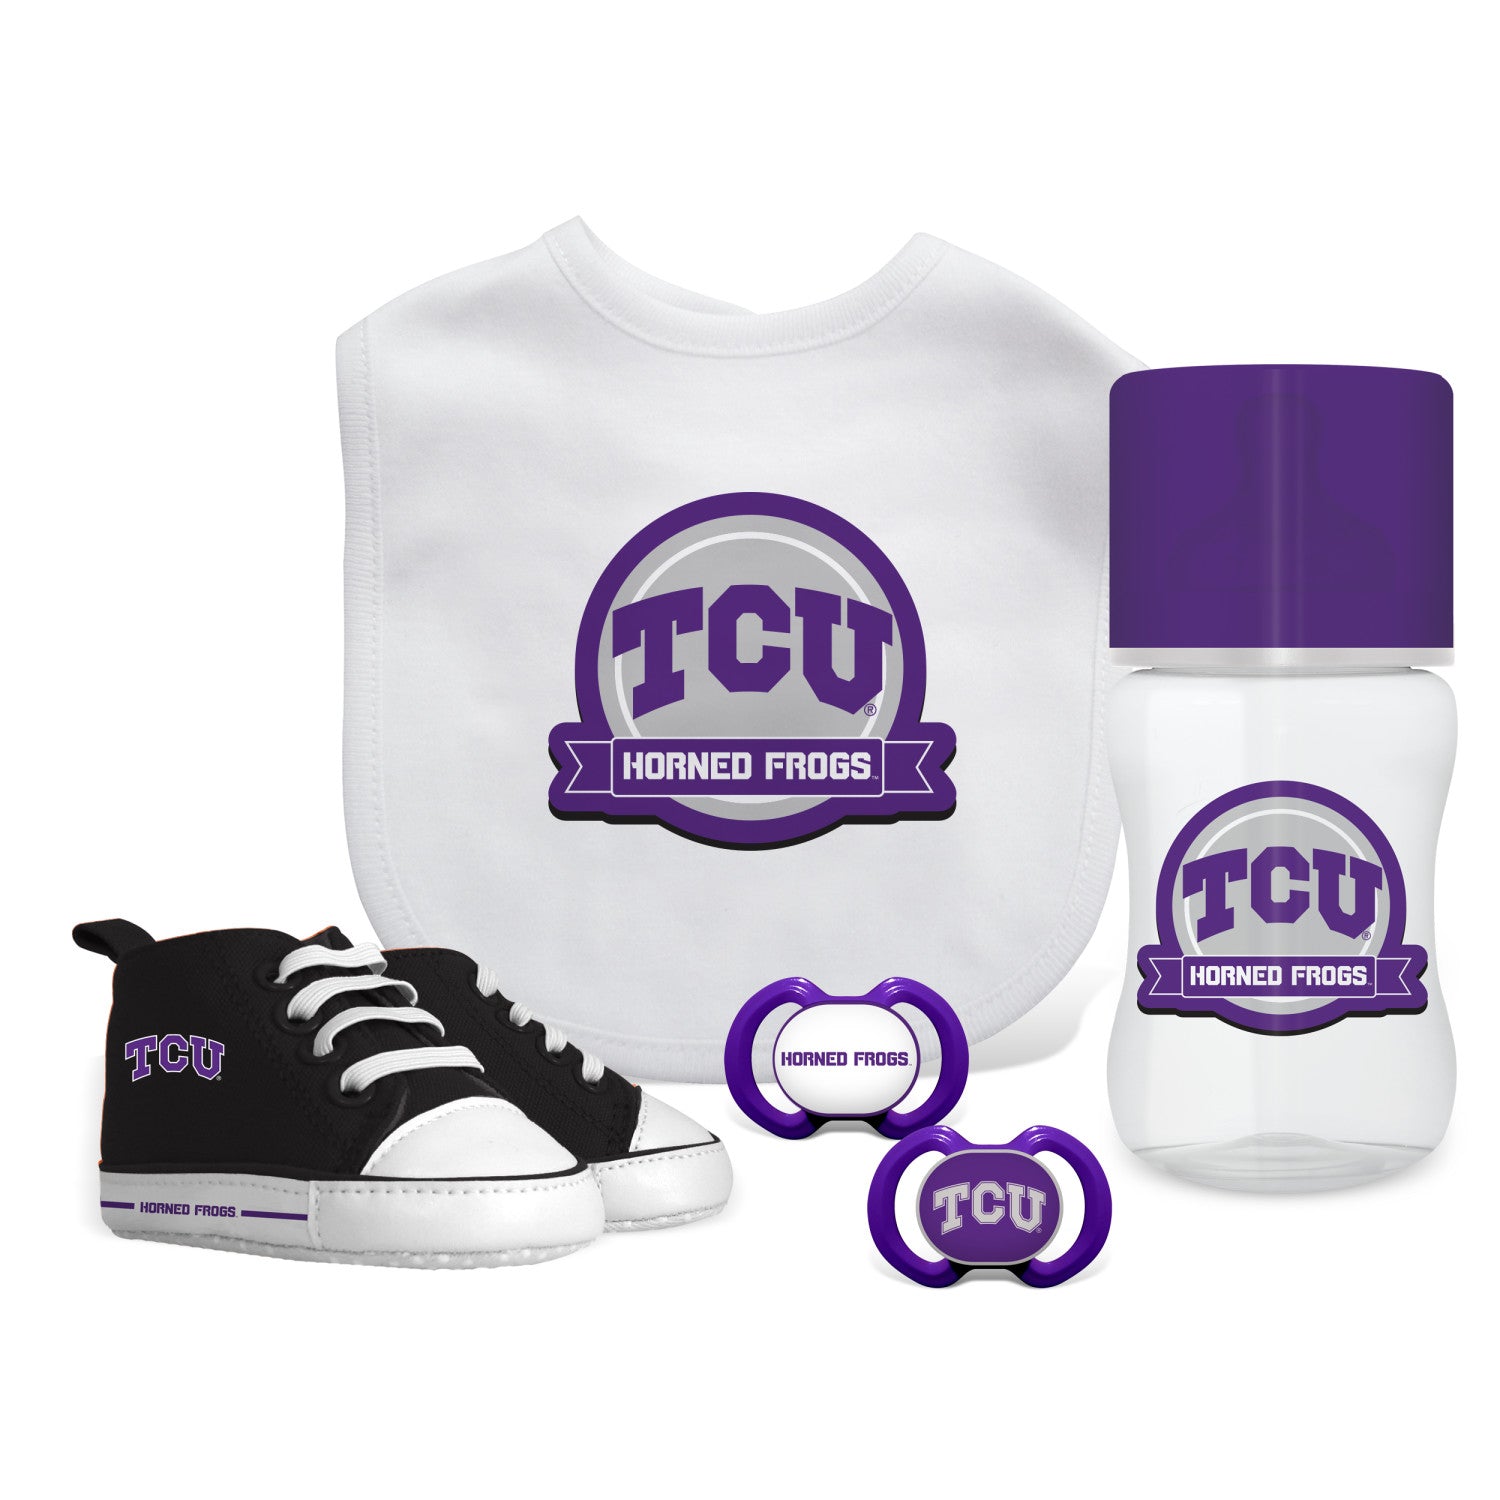 TCU Horned Frogs - 5-Piece Baby Gift Set